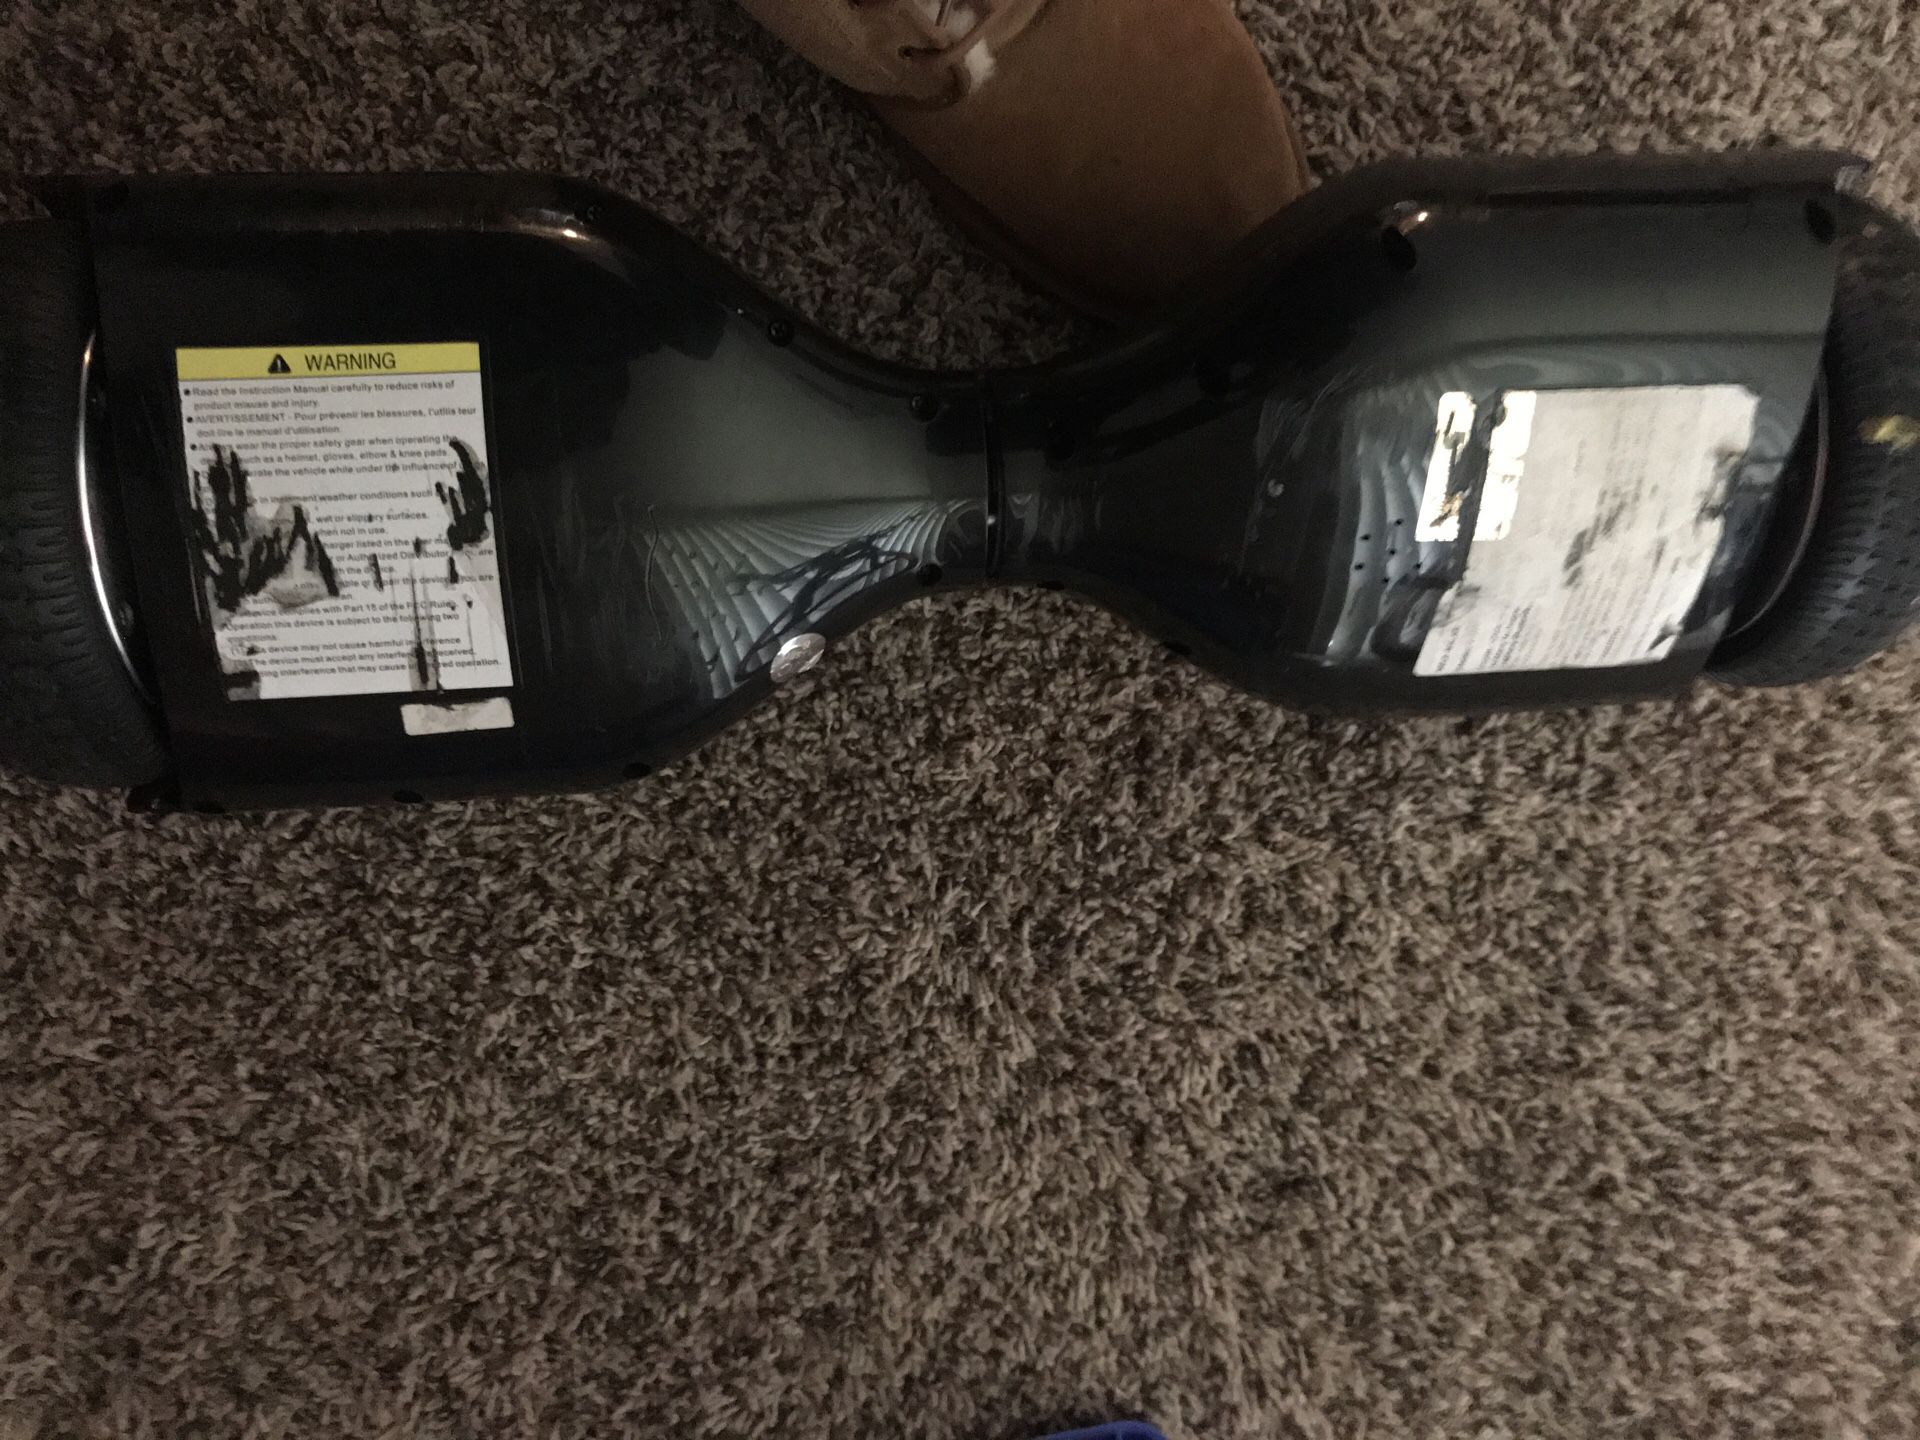 Bottom of hoverboard